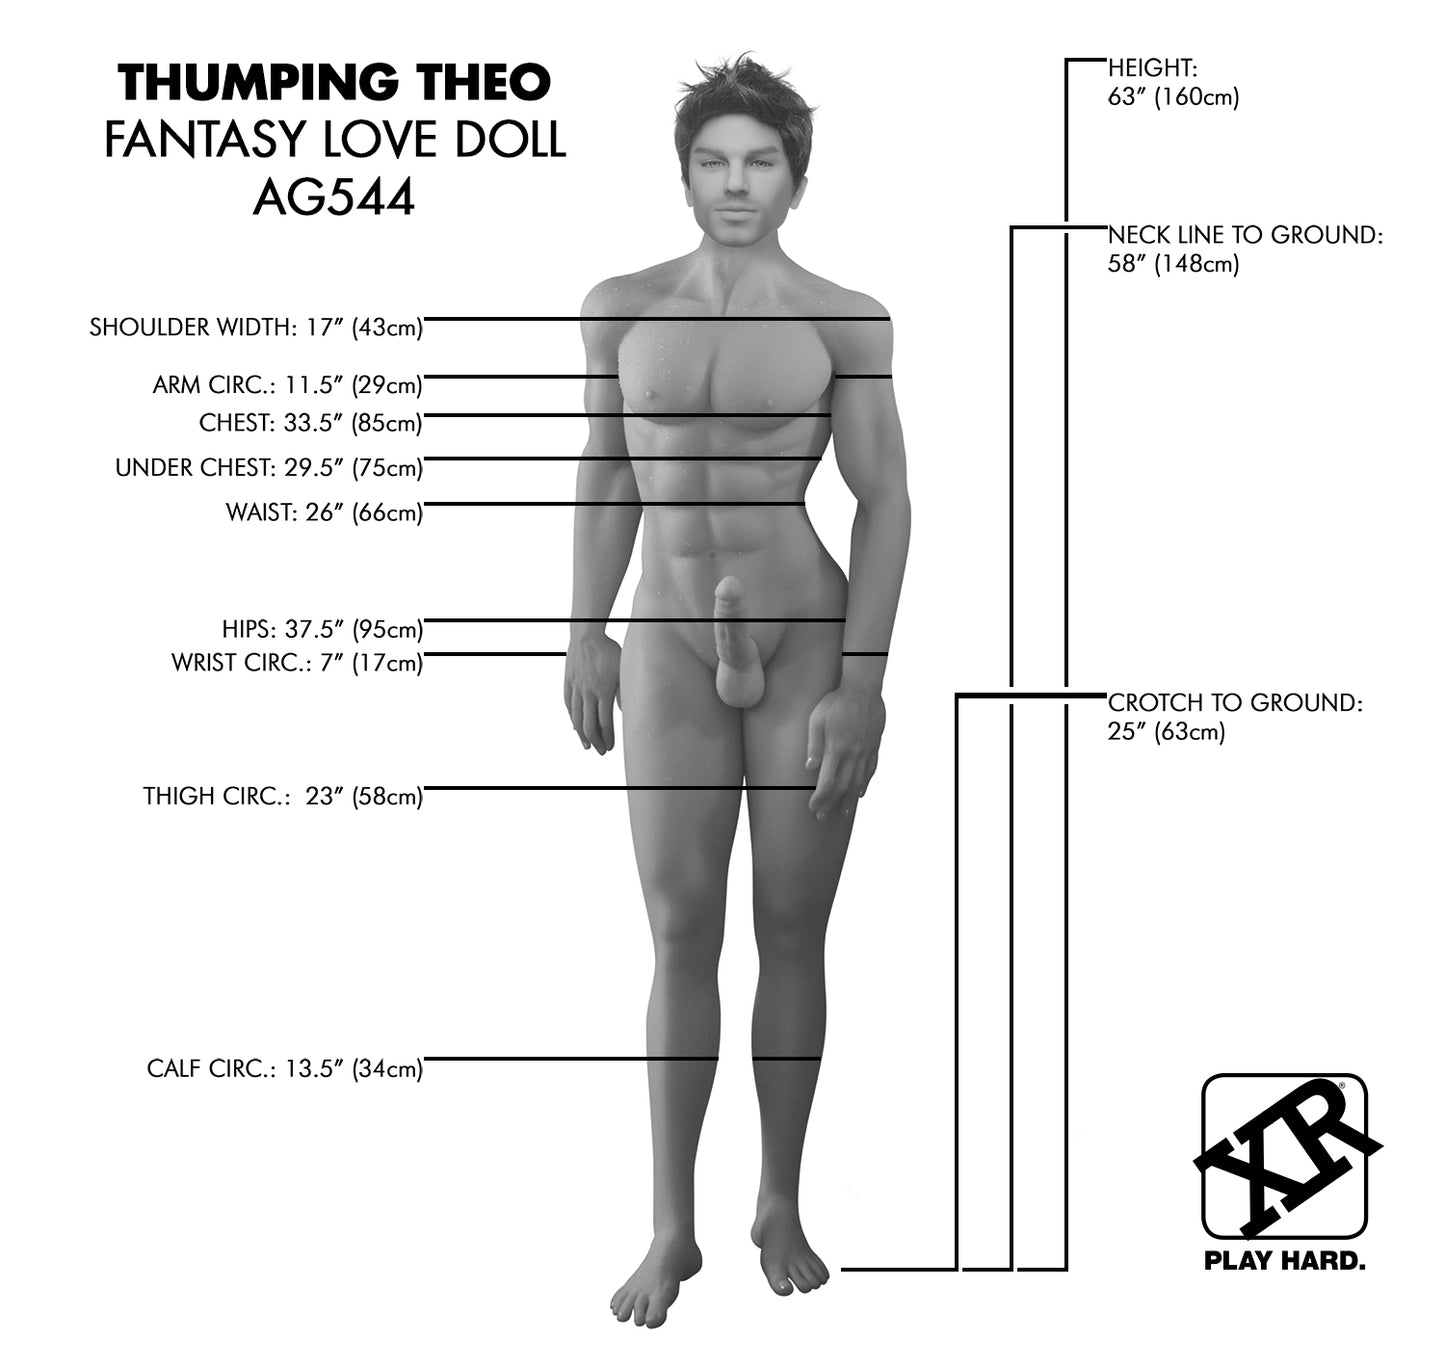 Thumping Theo Fantasy Male Love Doll - UABDSM